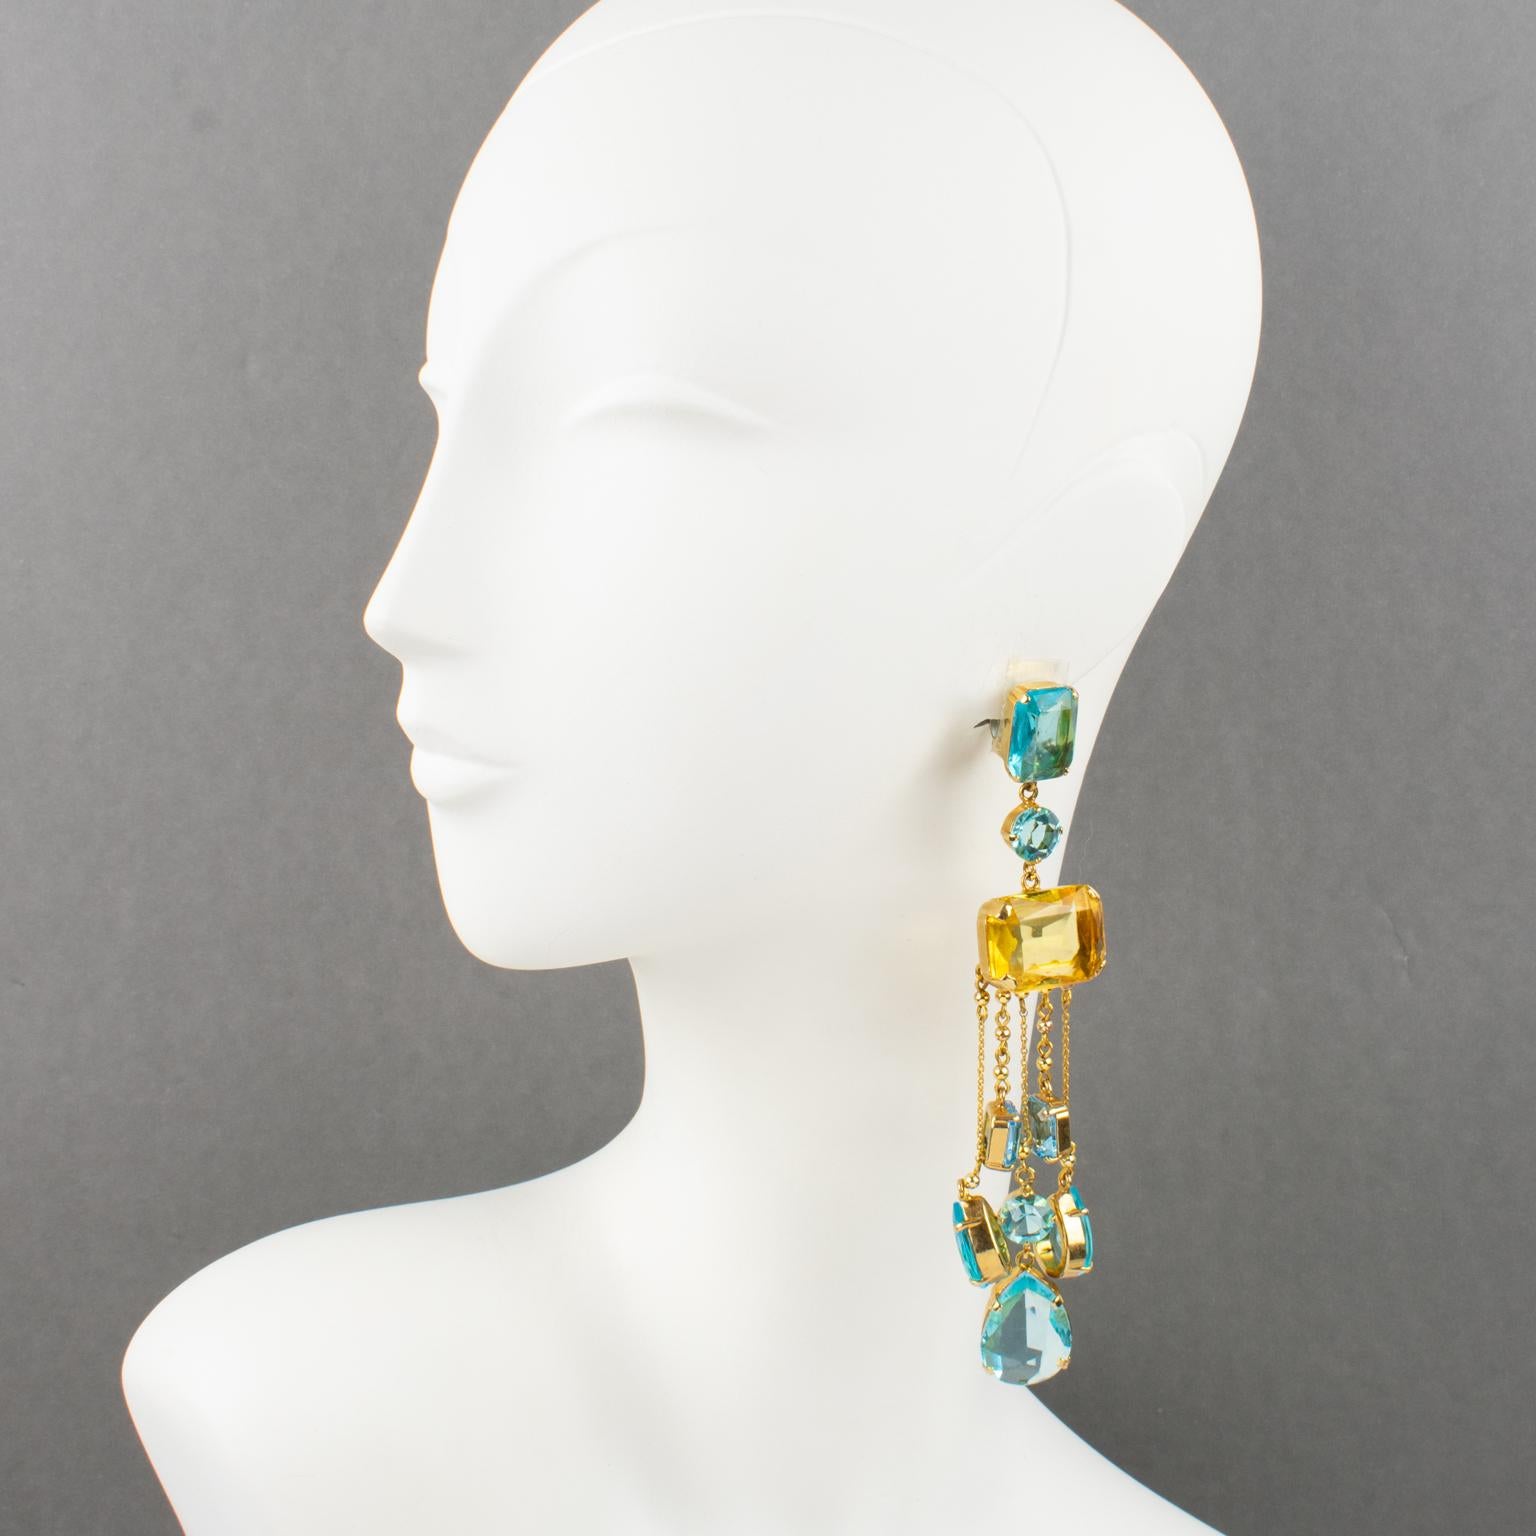 Carlo Zini designed those sophisticated dangling clip-on earrings. They feature an extra-long shoulder-duster geometric shape with gilded metal framing ornate with dangling charms. The aquamarine, turquoise, and yellow topaz colored-crystal